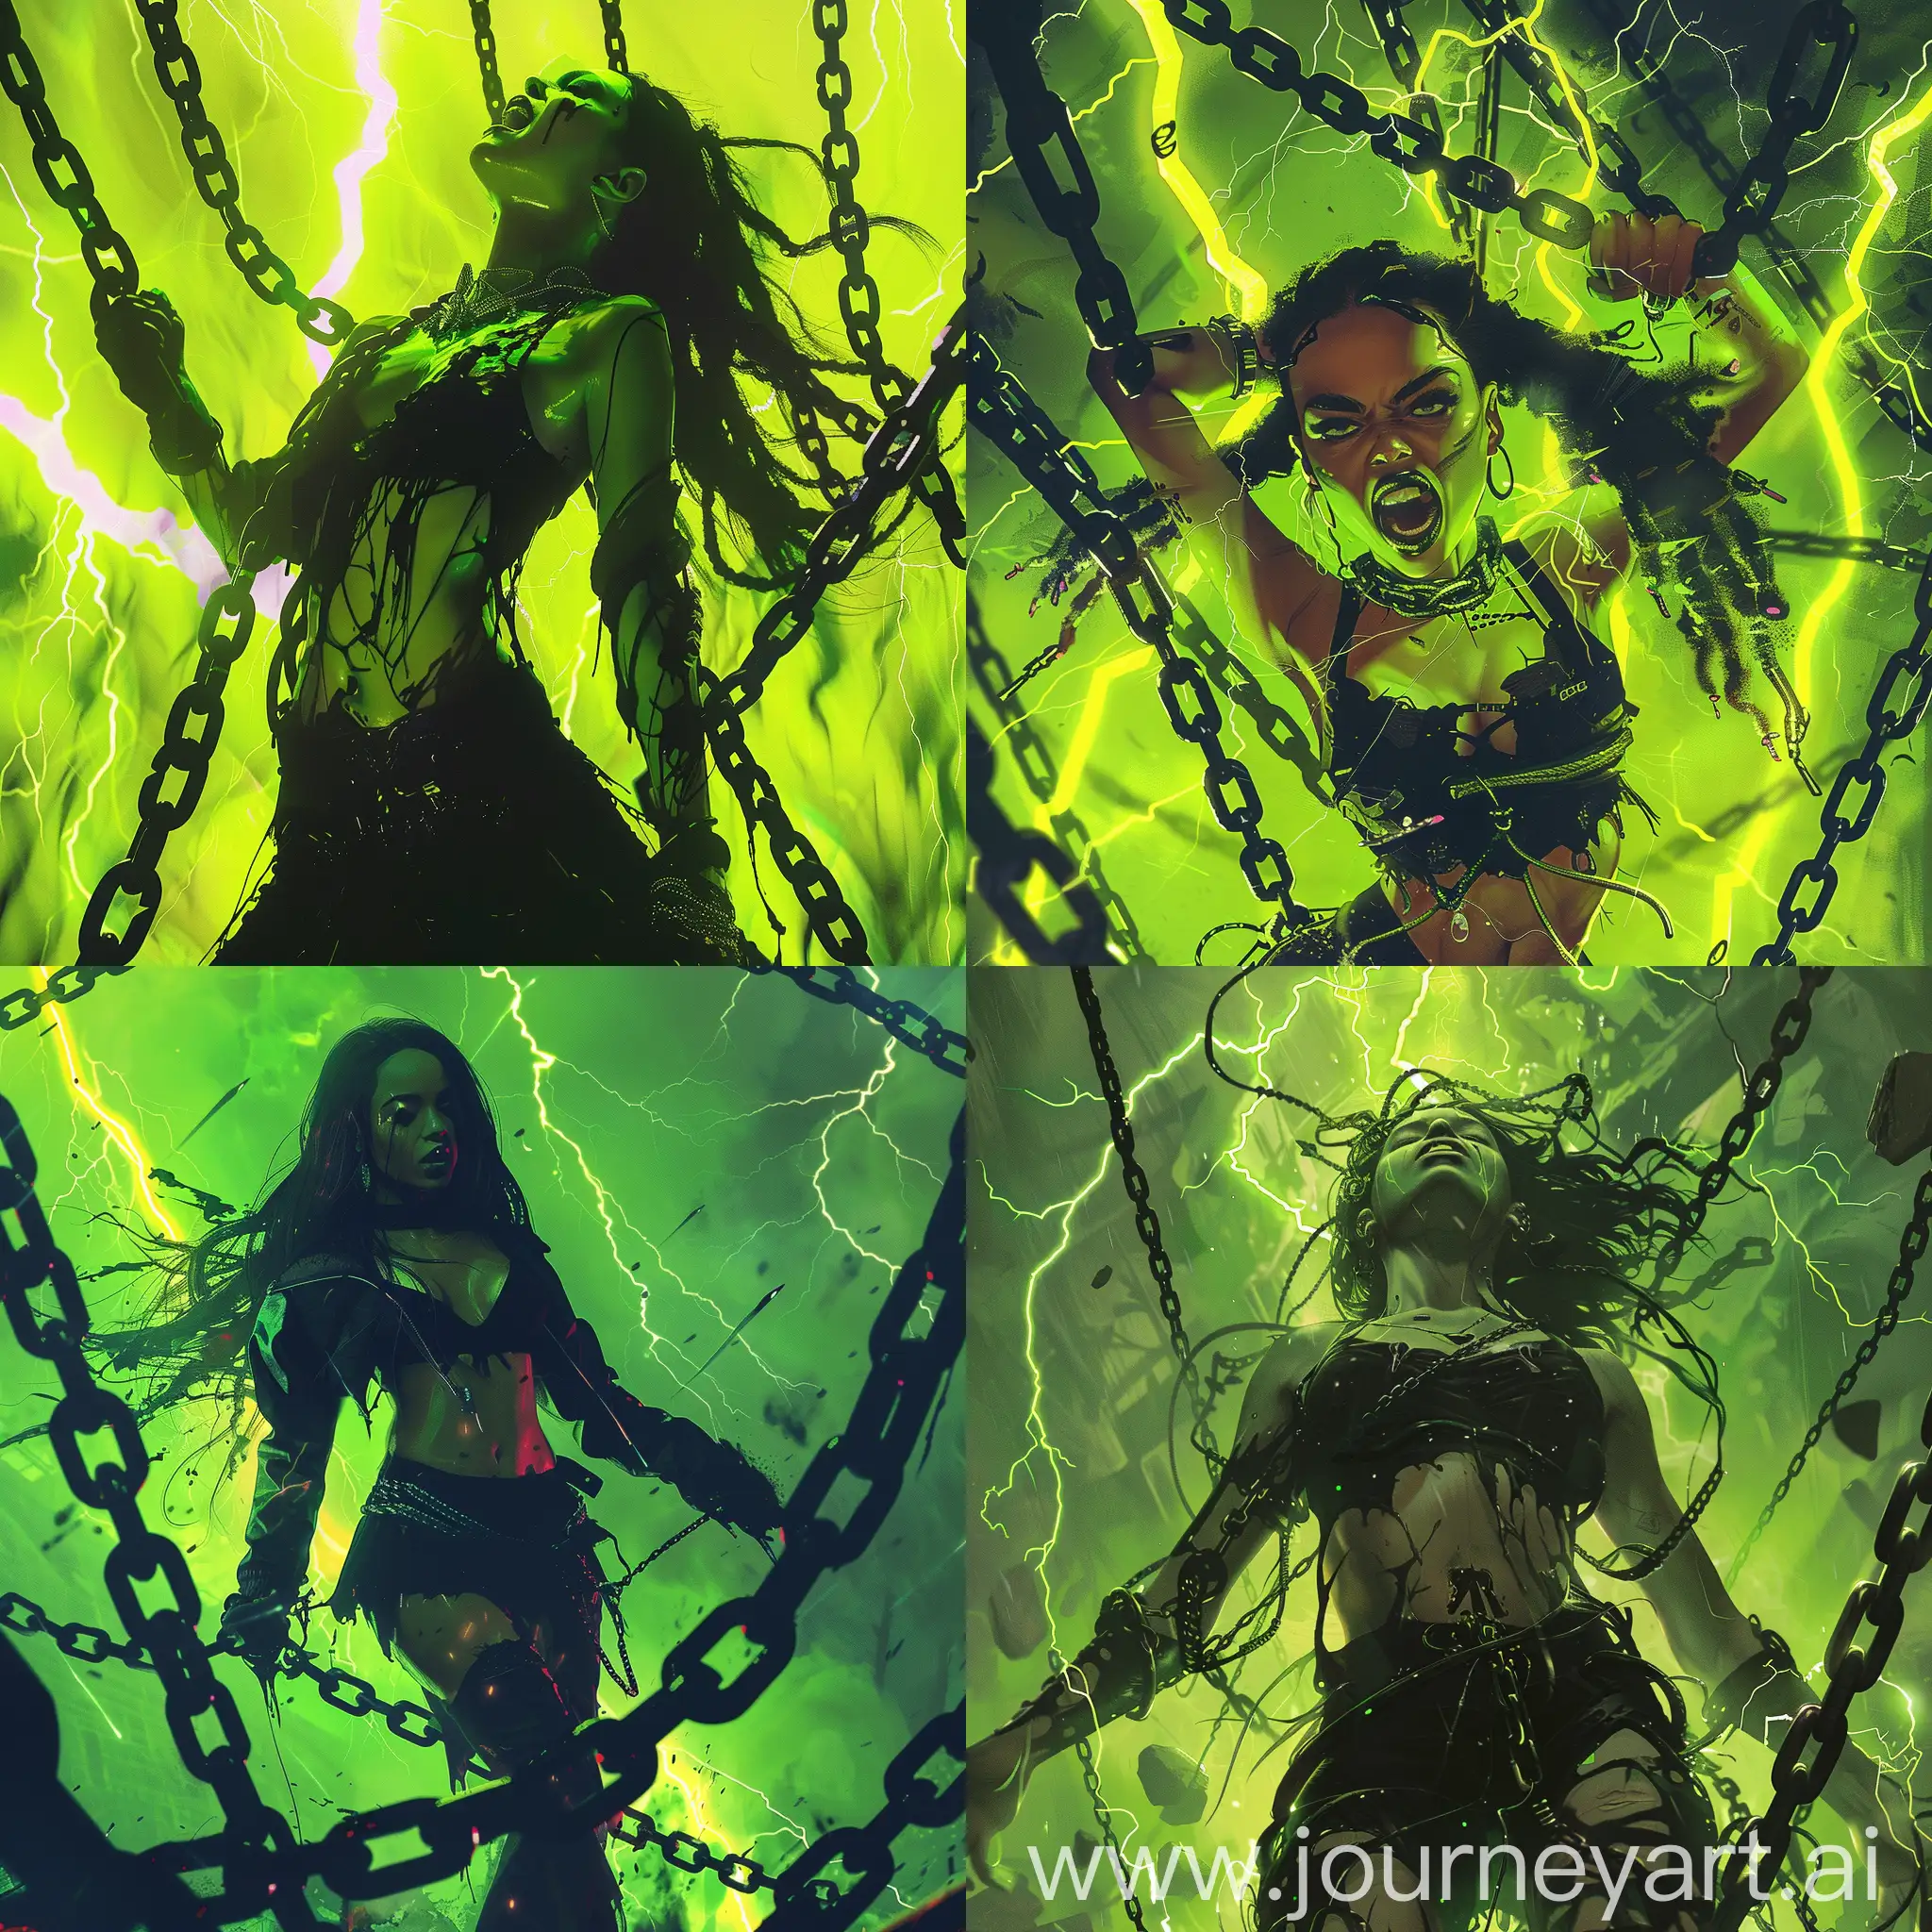 Brazilian phonk album cover, fantasy, anime woman in rage fully black, floating chains everywhere, lime, back lightning